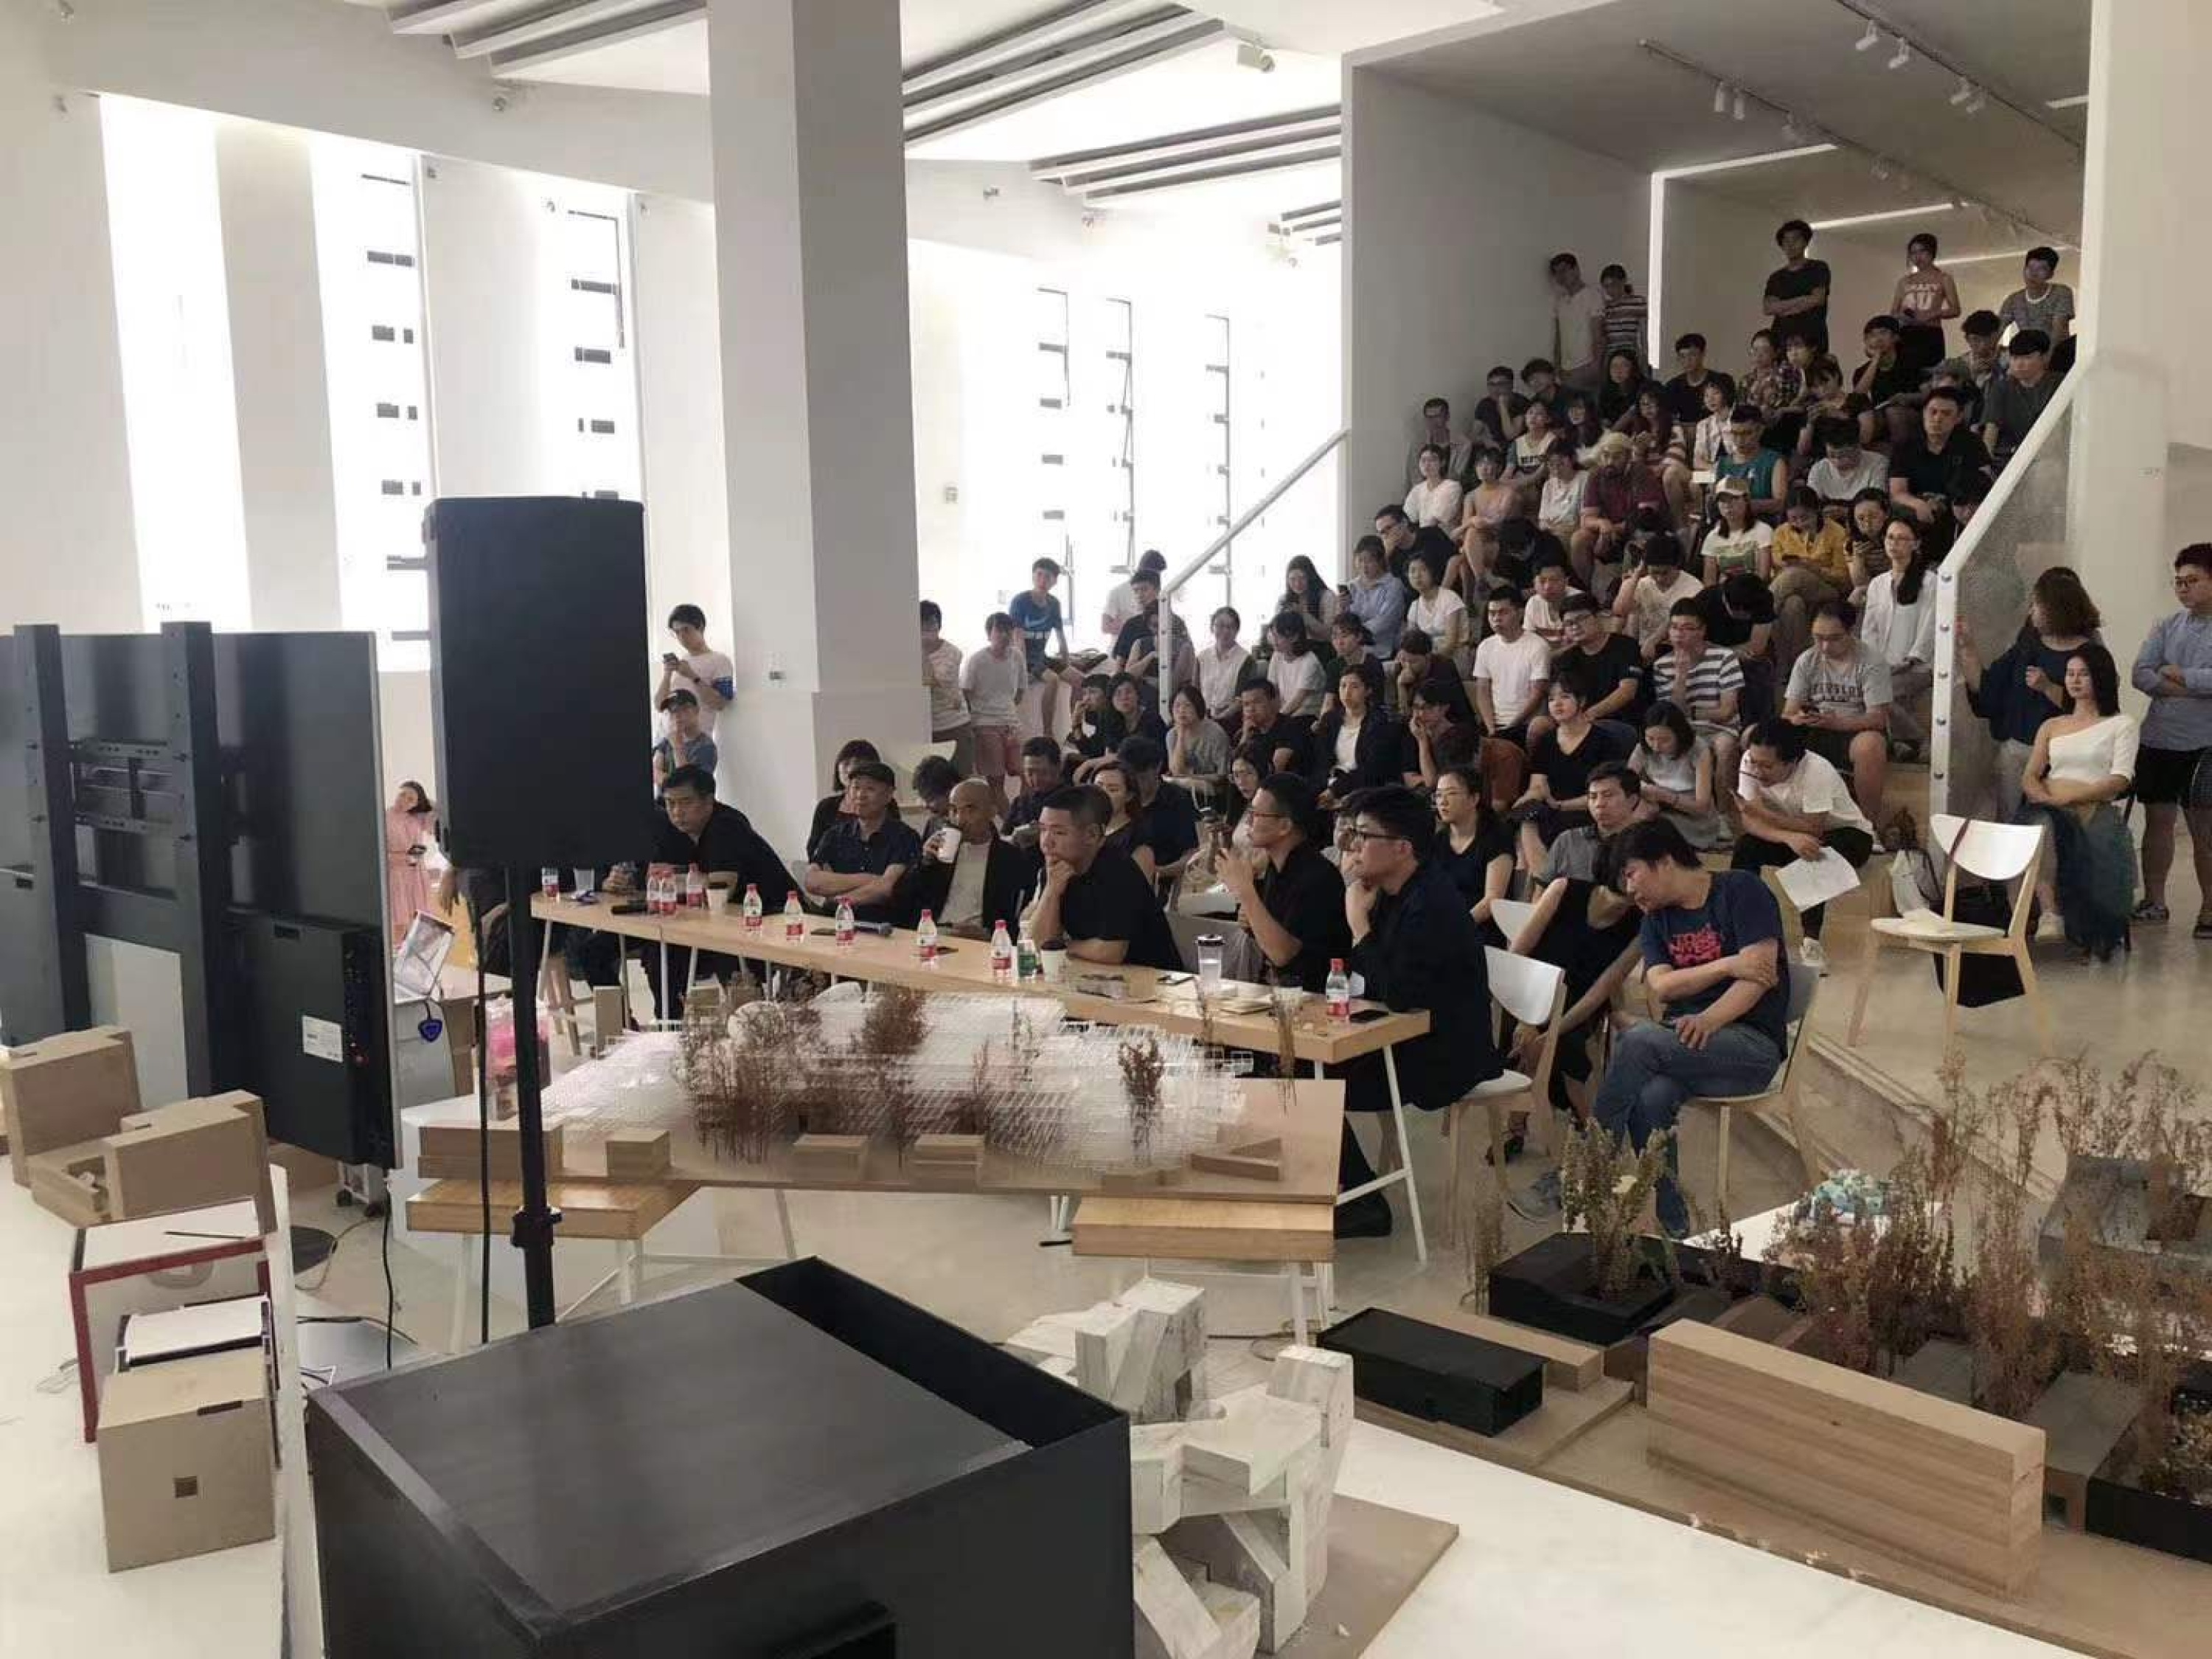 Jiakun Liu and Zigeng Wang Jointly Guided the Design Course “Film Museum” for the Third Year Experimental Class of the Central Academy of Fine Arts